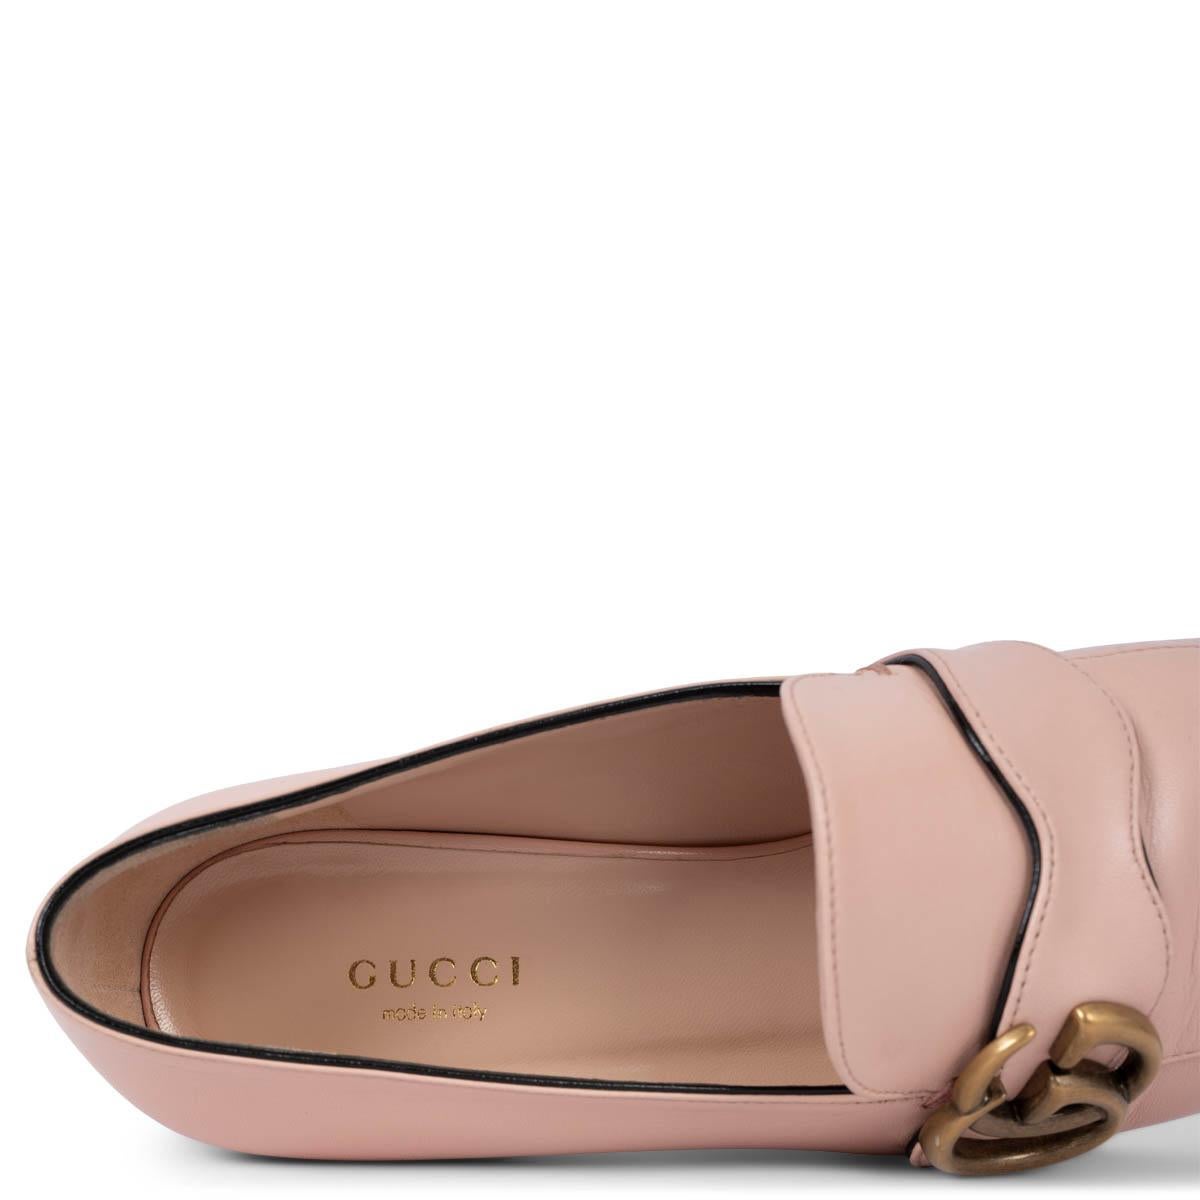 GUCCI light pink leather GG MARMONT Loafers Shoes 37.5 For Sale 3